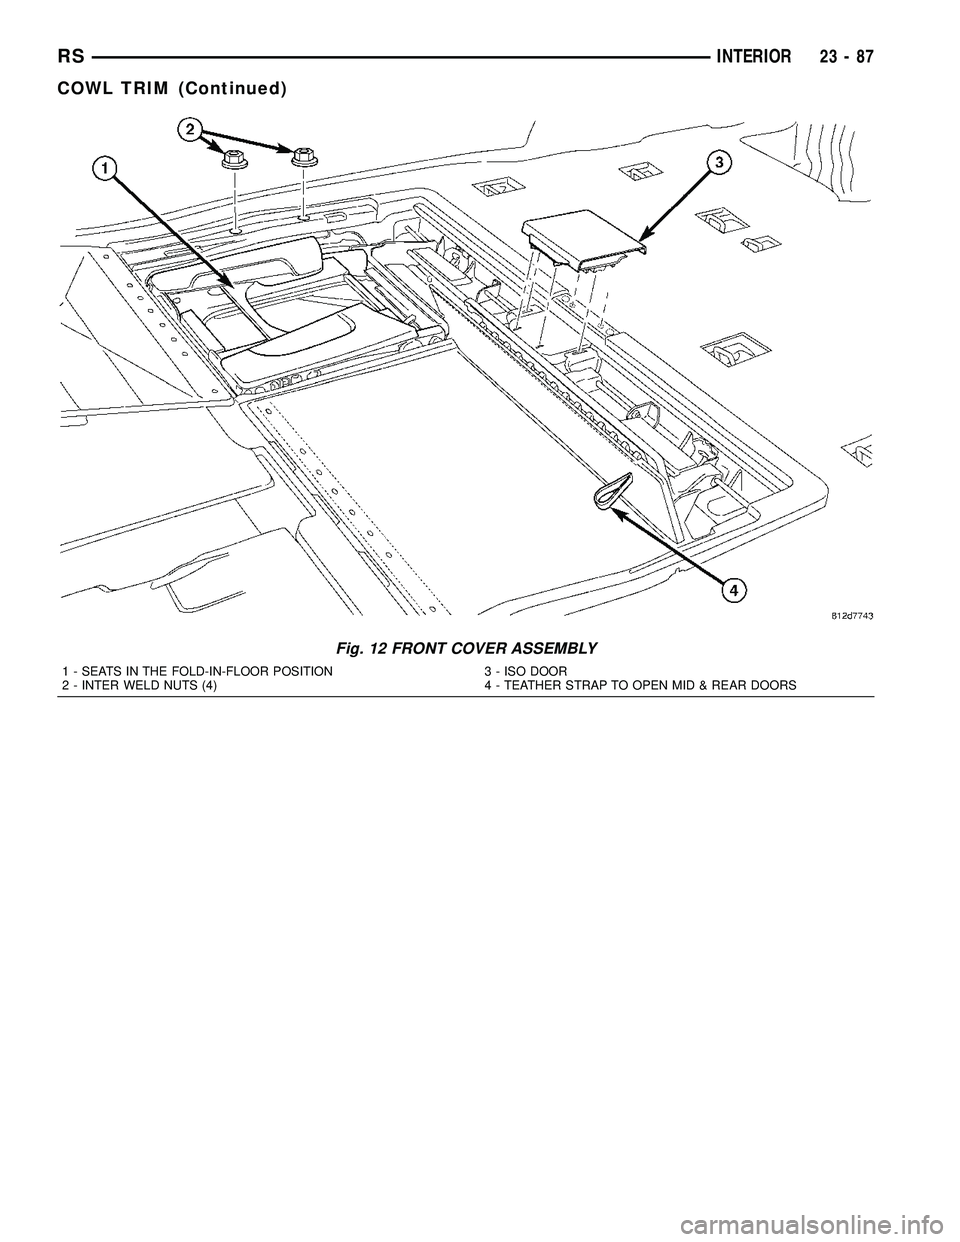 CHRYSLER VOYAGER 2005  Service Manual Fig. 12 FRONT COVER ASSEMBLY
1 - SEATS IN THE FOLD-IN-FLOOR POSITION
2 - INTER WELD NUTS (4)3 - ISO DOOR
4 - TEATHER STRAP TO OPEN MID & REAR DOORS
RSINTERIOR23-87
COWL TRIM (Continued) 